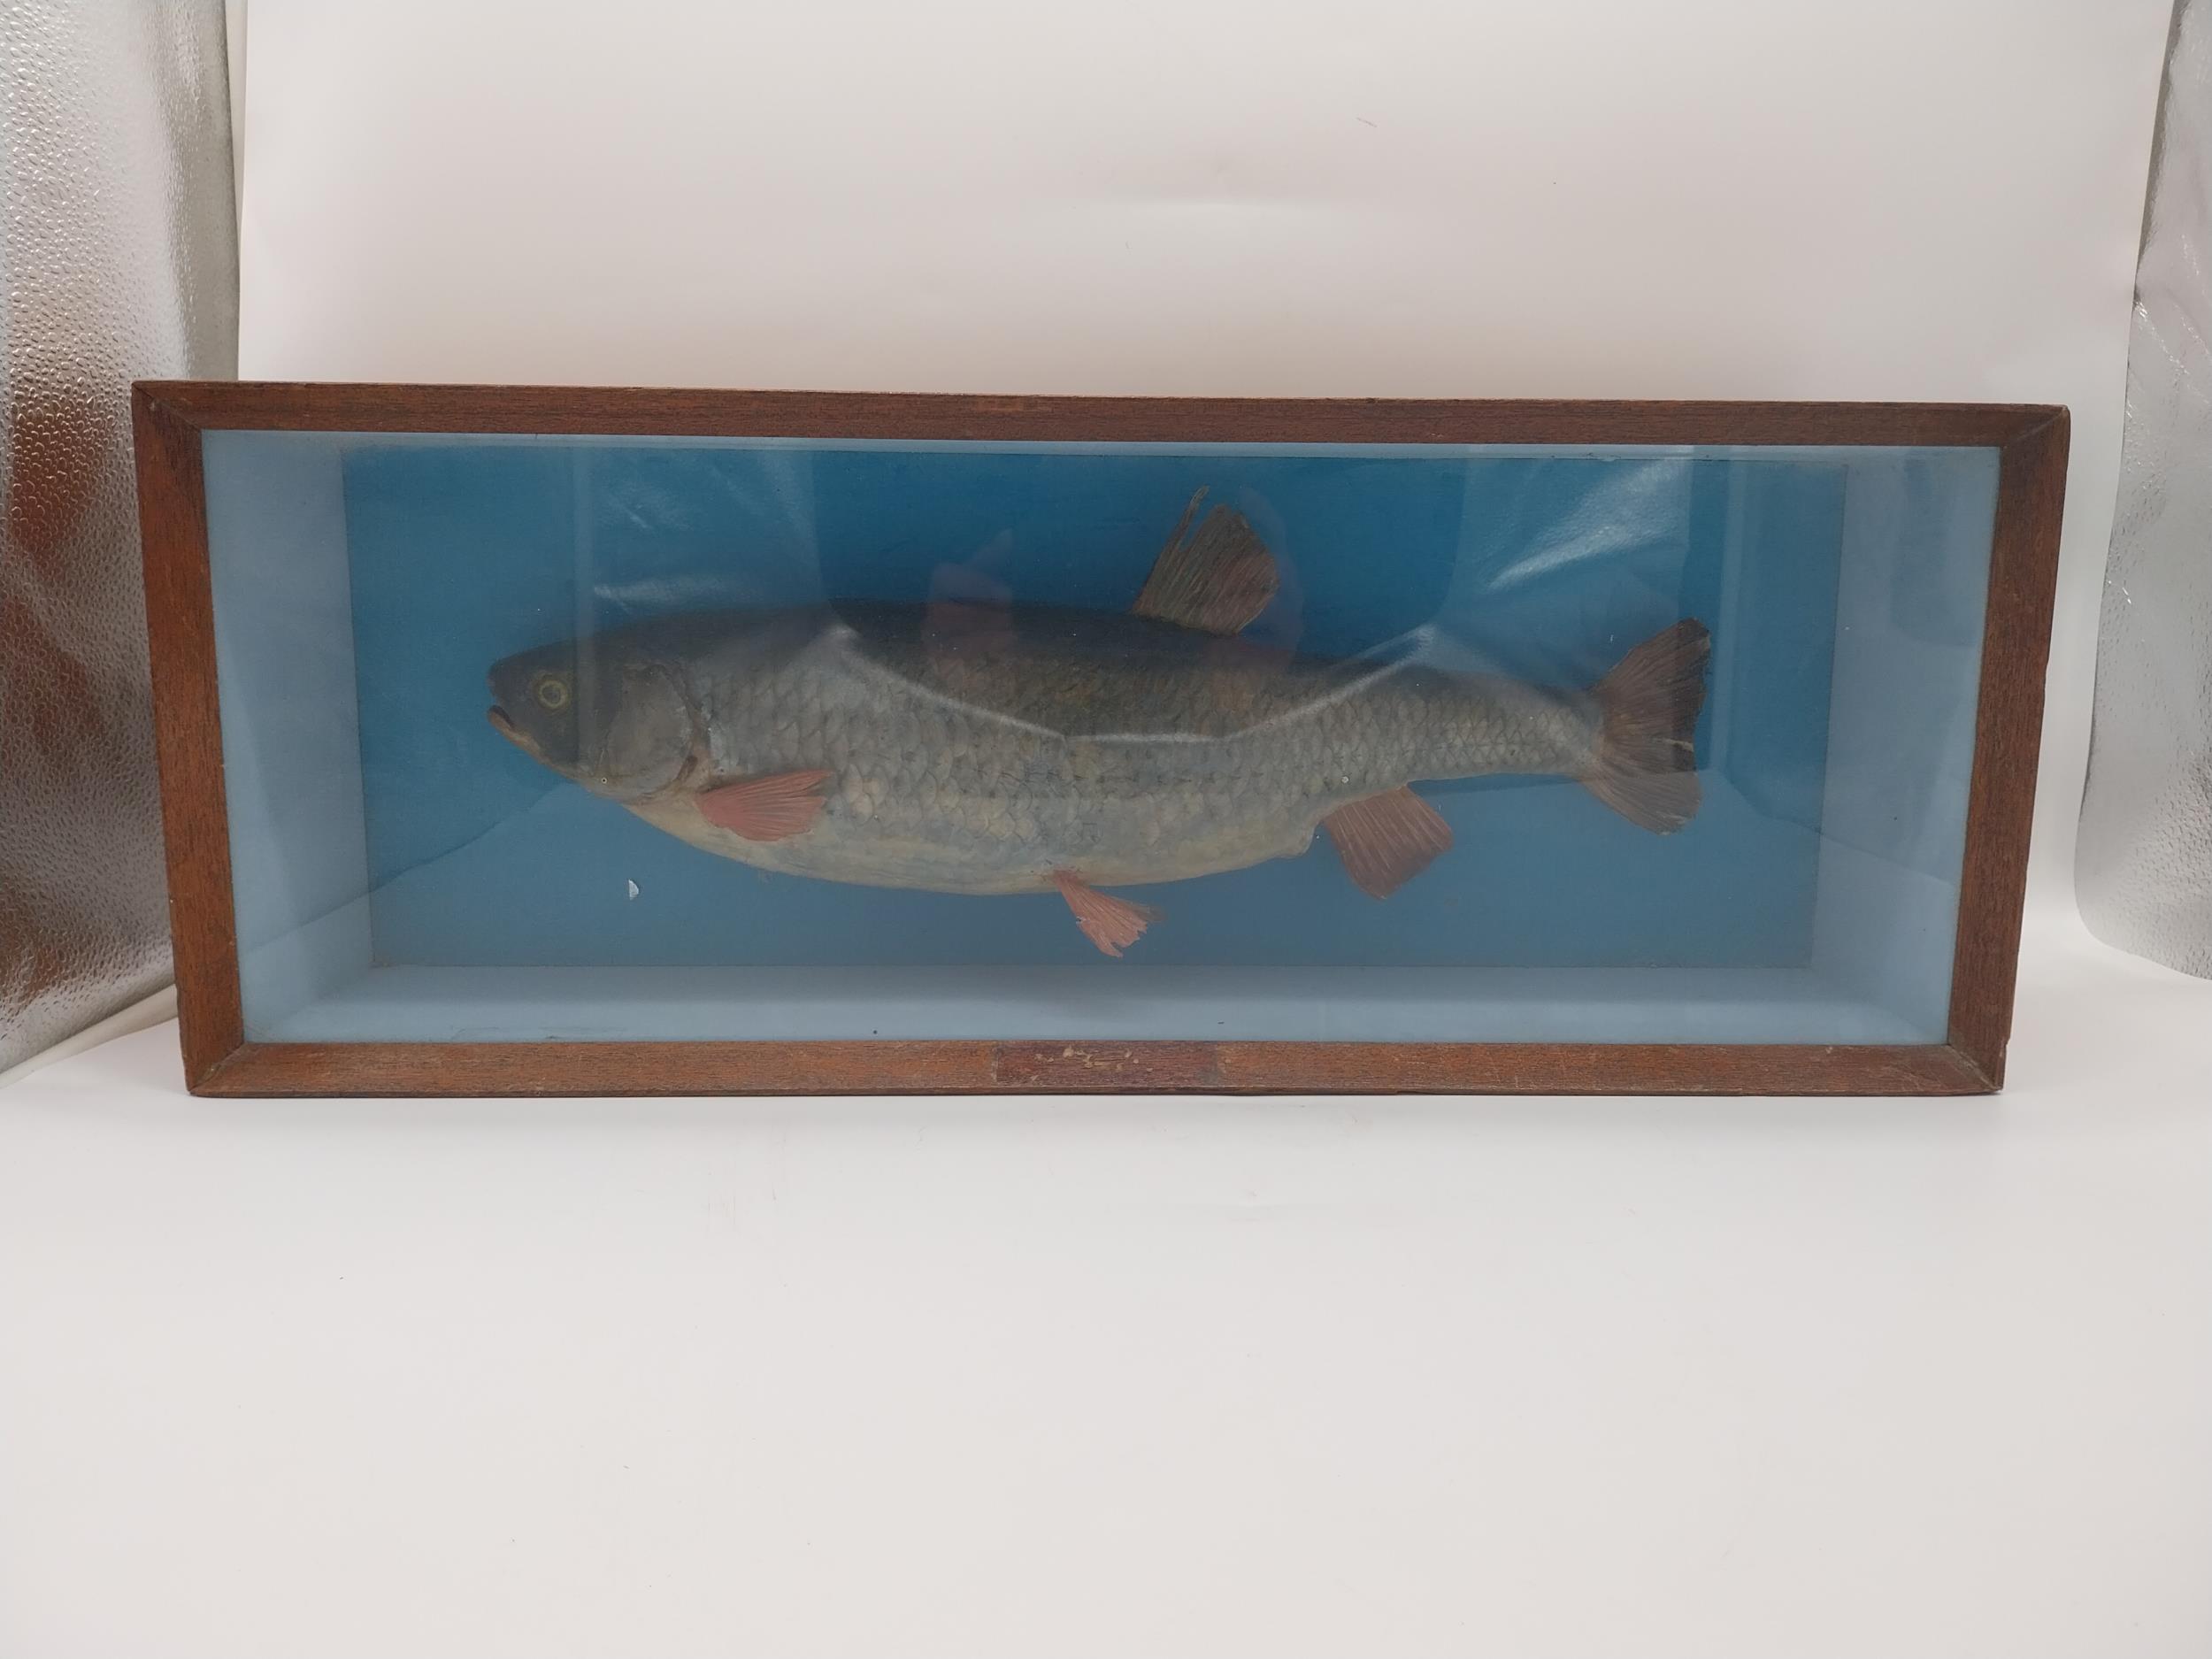 Early 20th C. taxidermy fish in glazed mahogany display case. {23 cm H x 61 m W x 16 cm D]. - Image 2 of 4